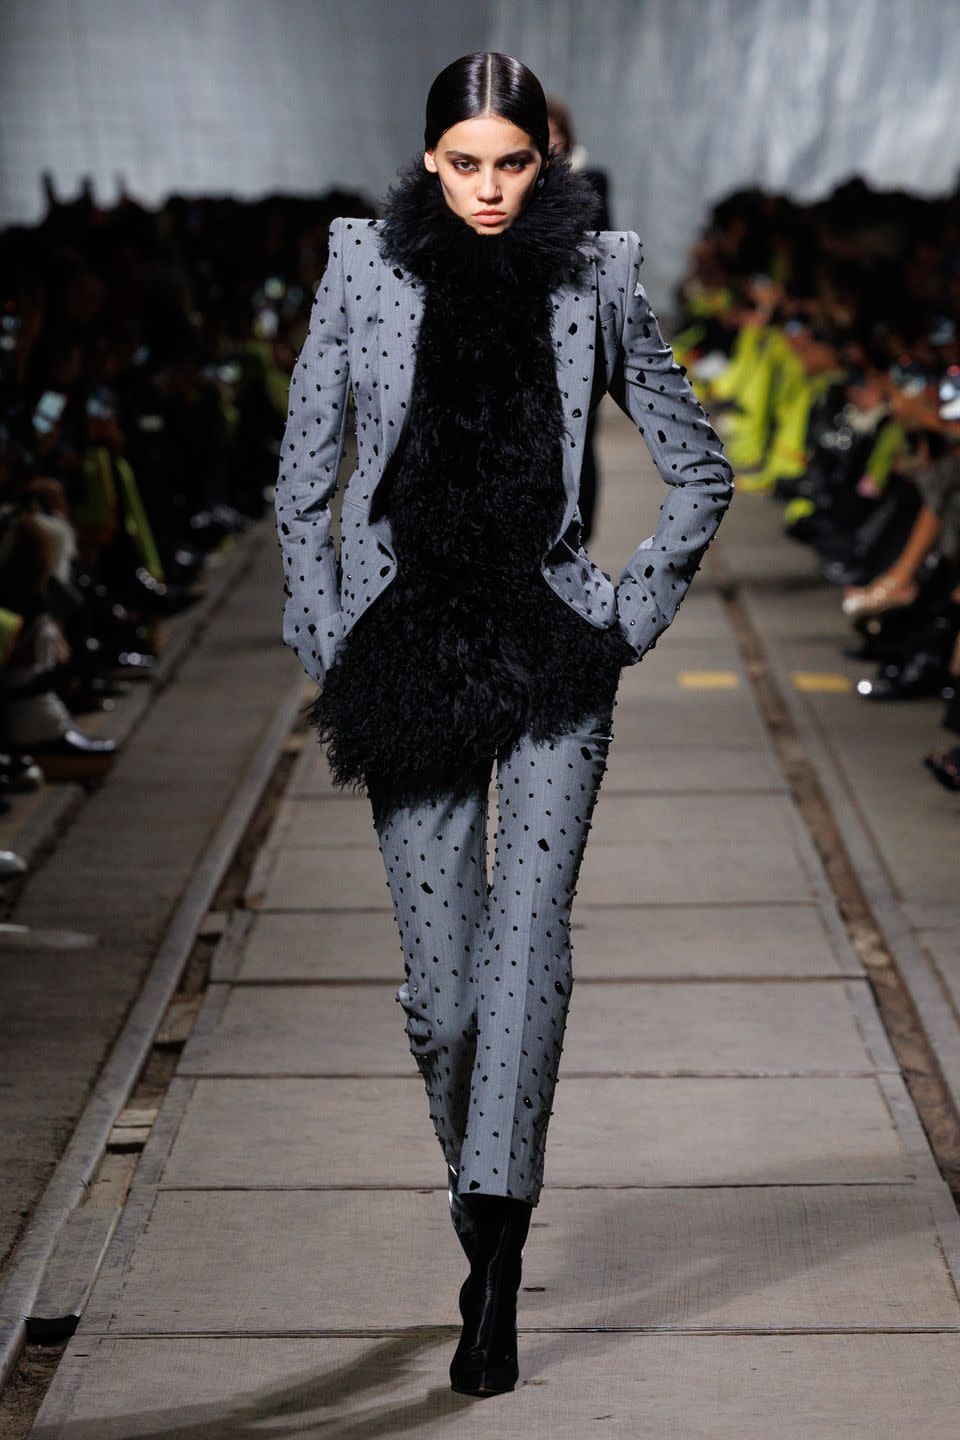 Seán McGirr’s Debut at Alexander McQueen Was About “Rough Glamour”